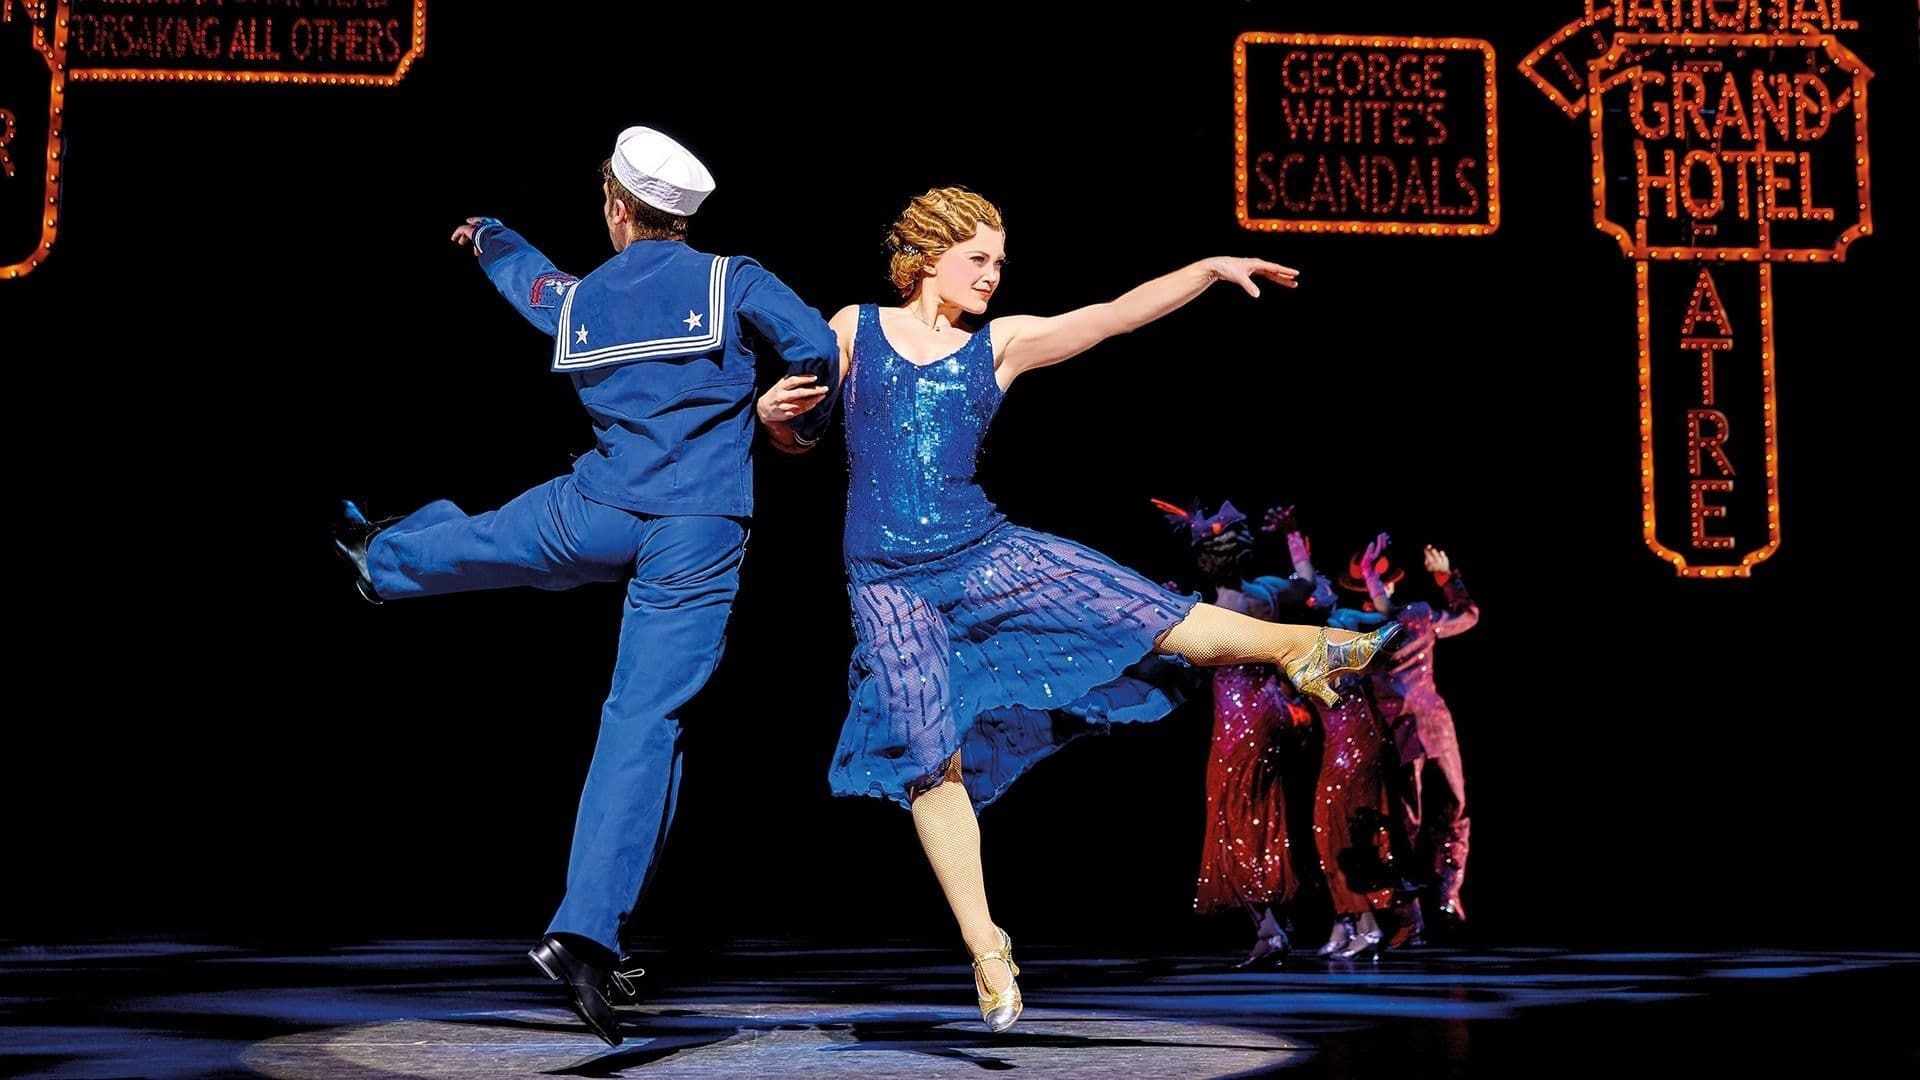 42nd Street: The Musical background